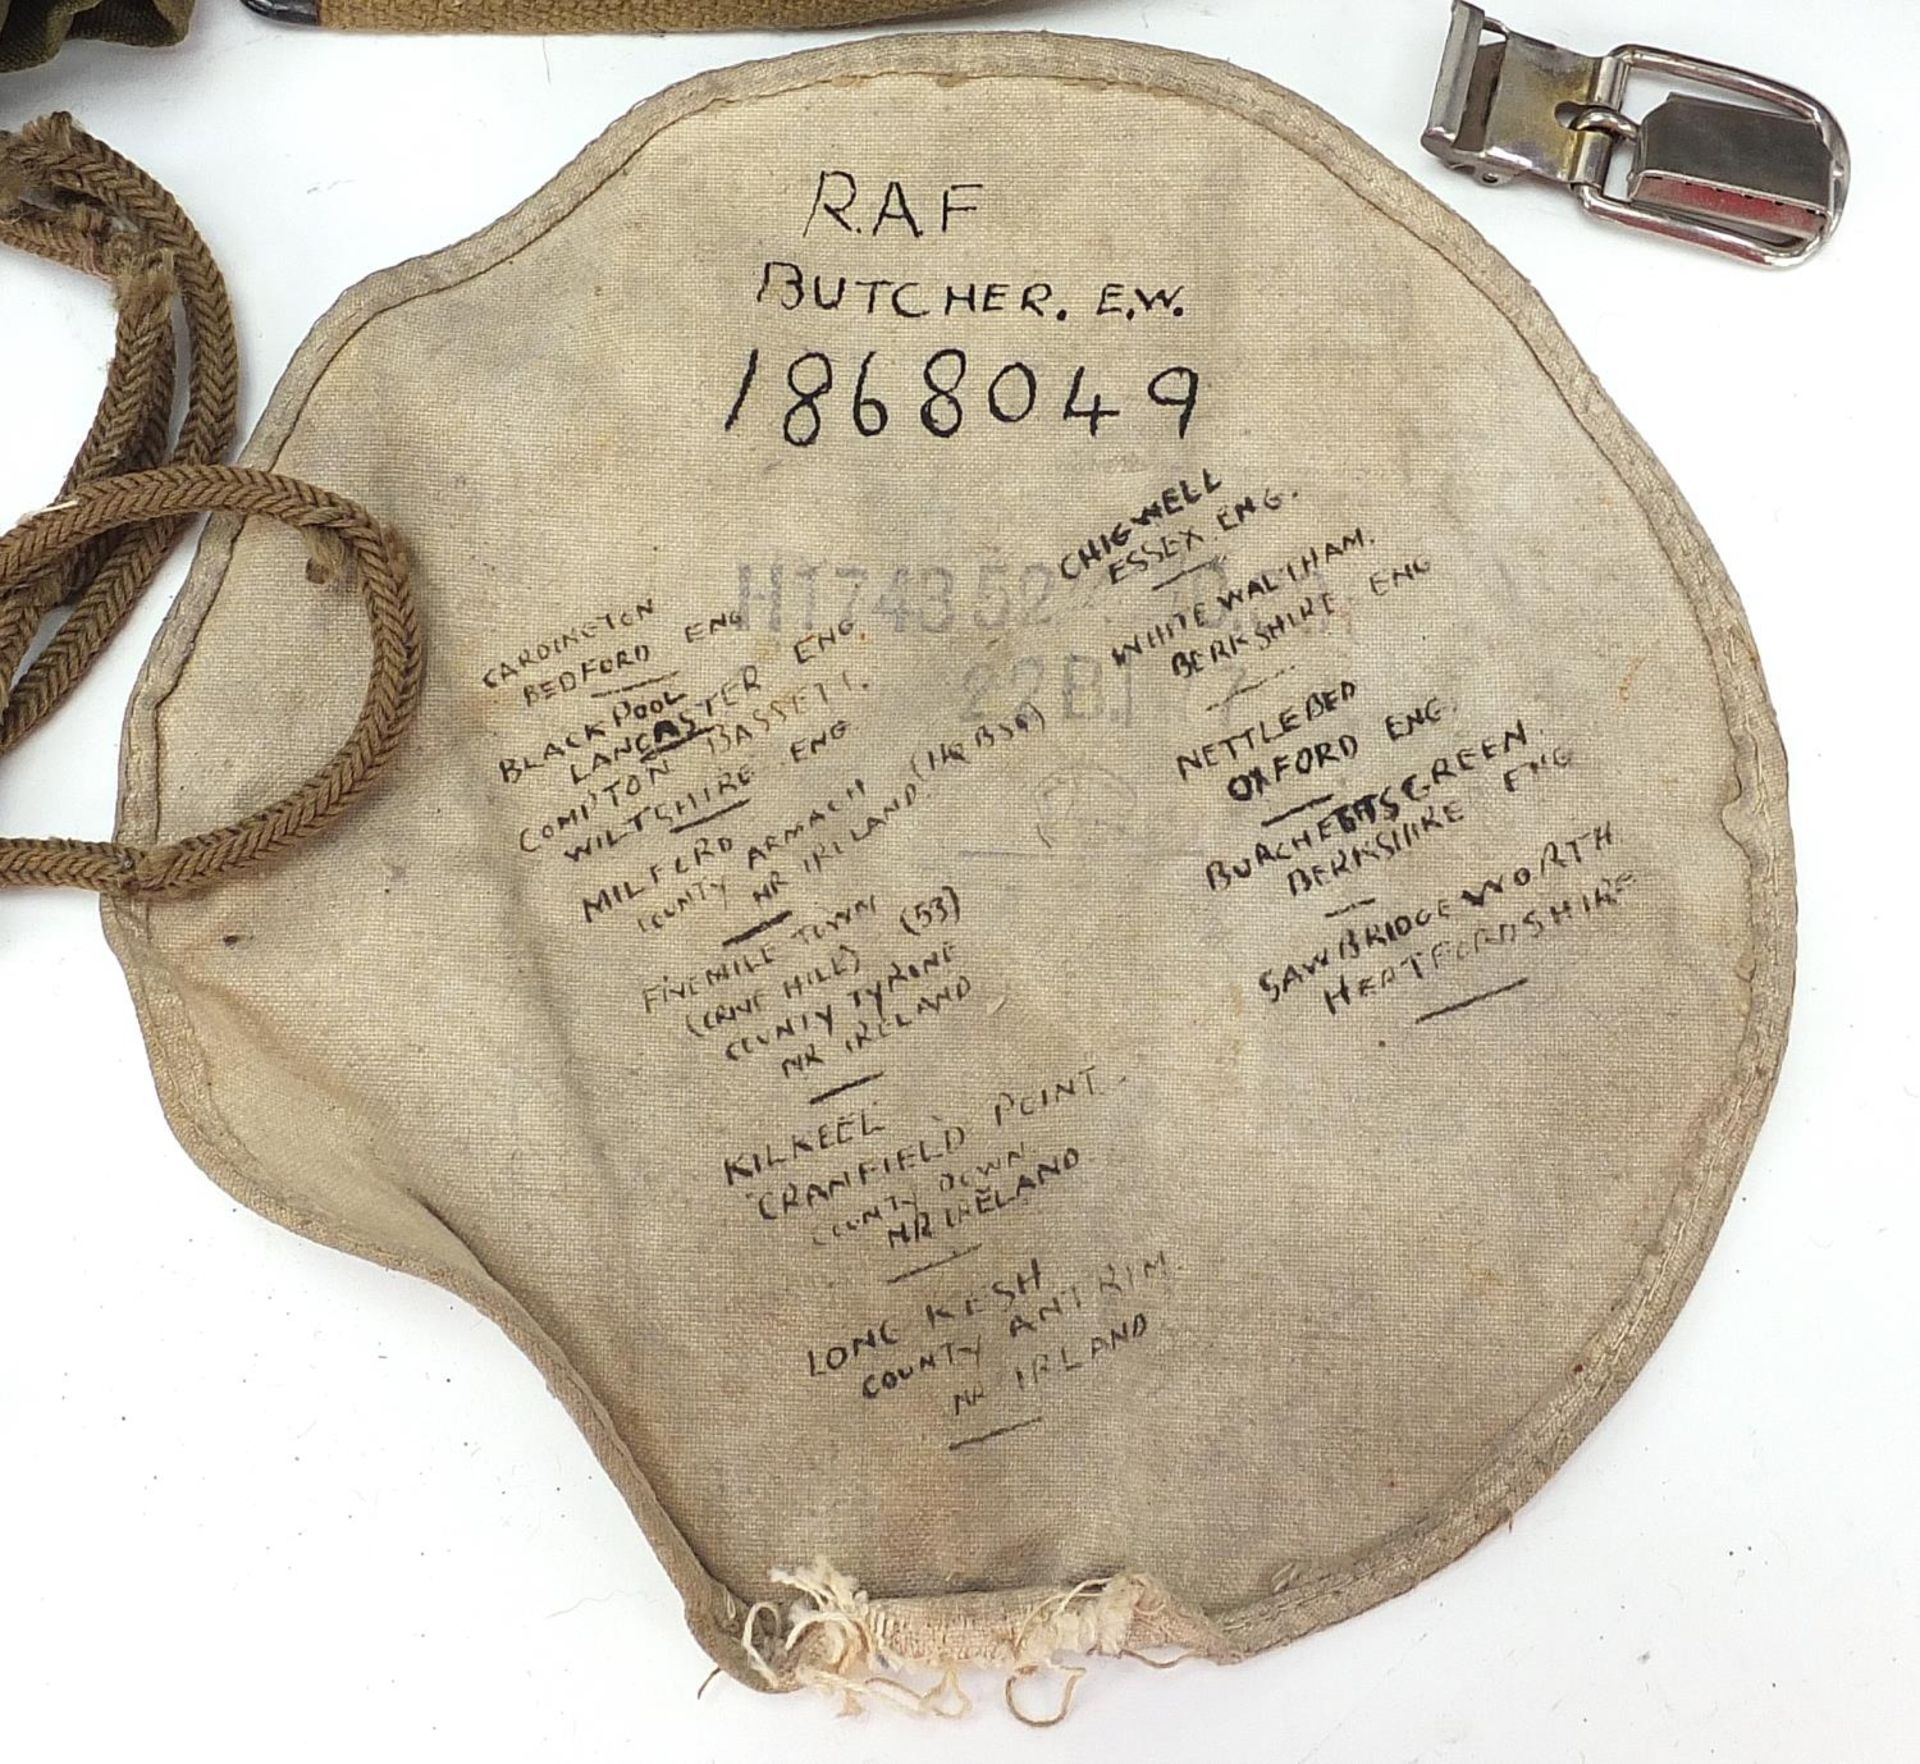 Militaria including canvas belts and material inscribed RAF Butcher EW 1868049 - Image 2 of 3